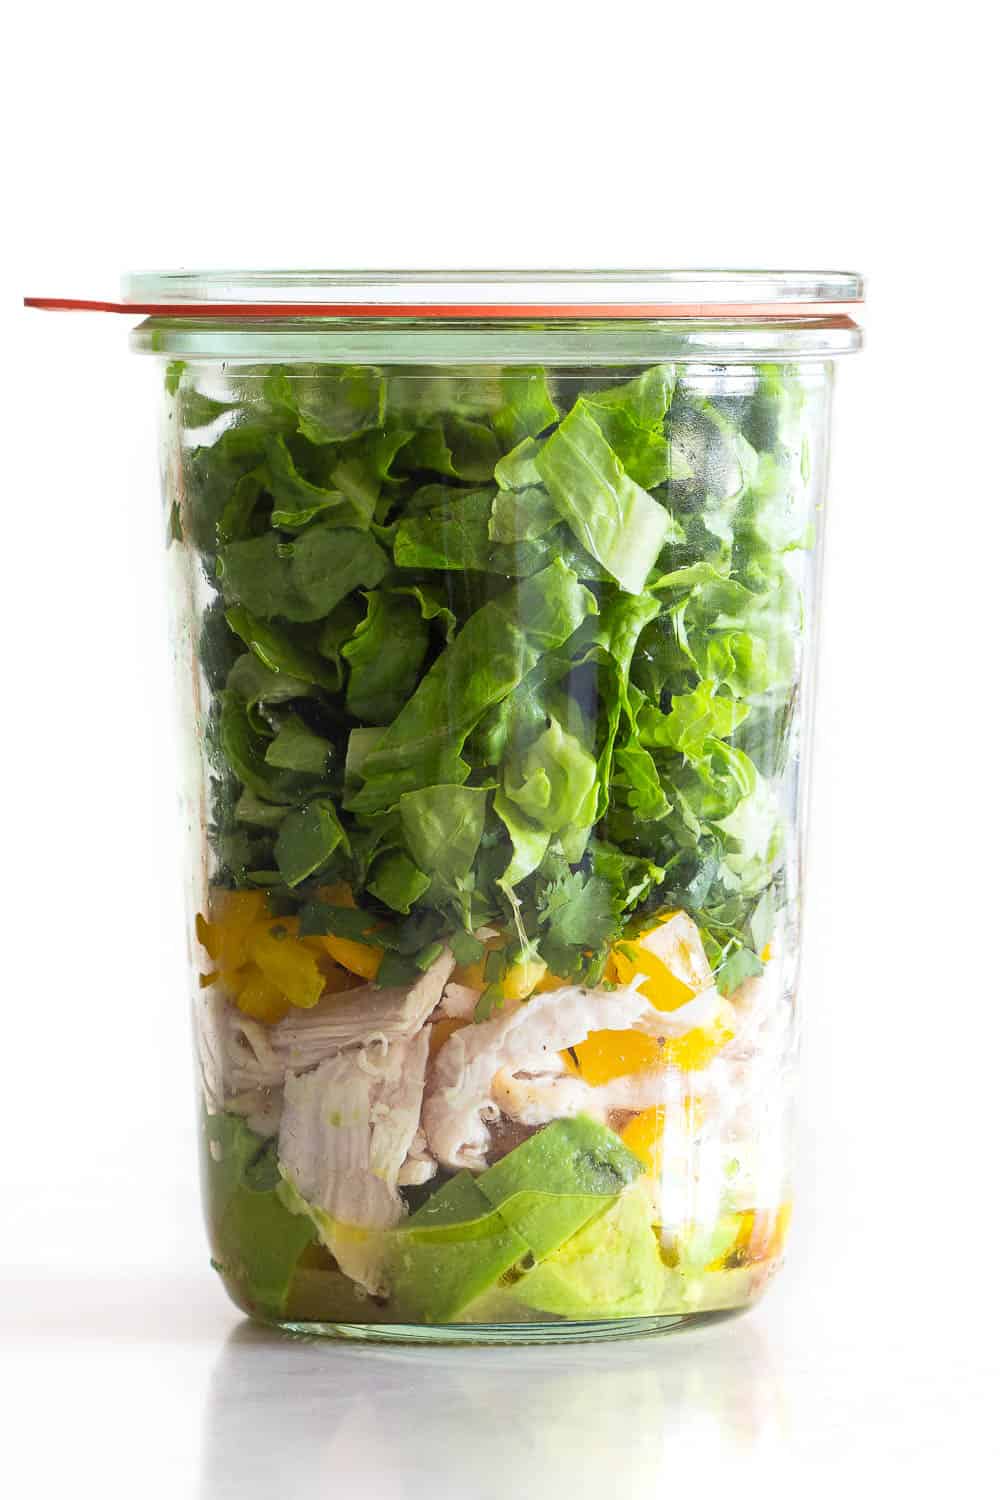 Meal Prep version of Avocado Chicken Salad layered in a glass jar